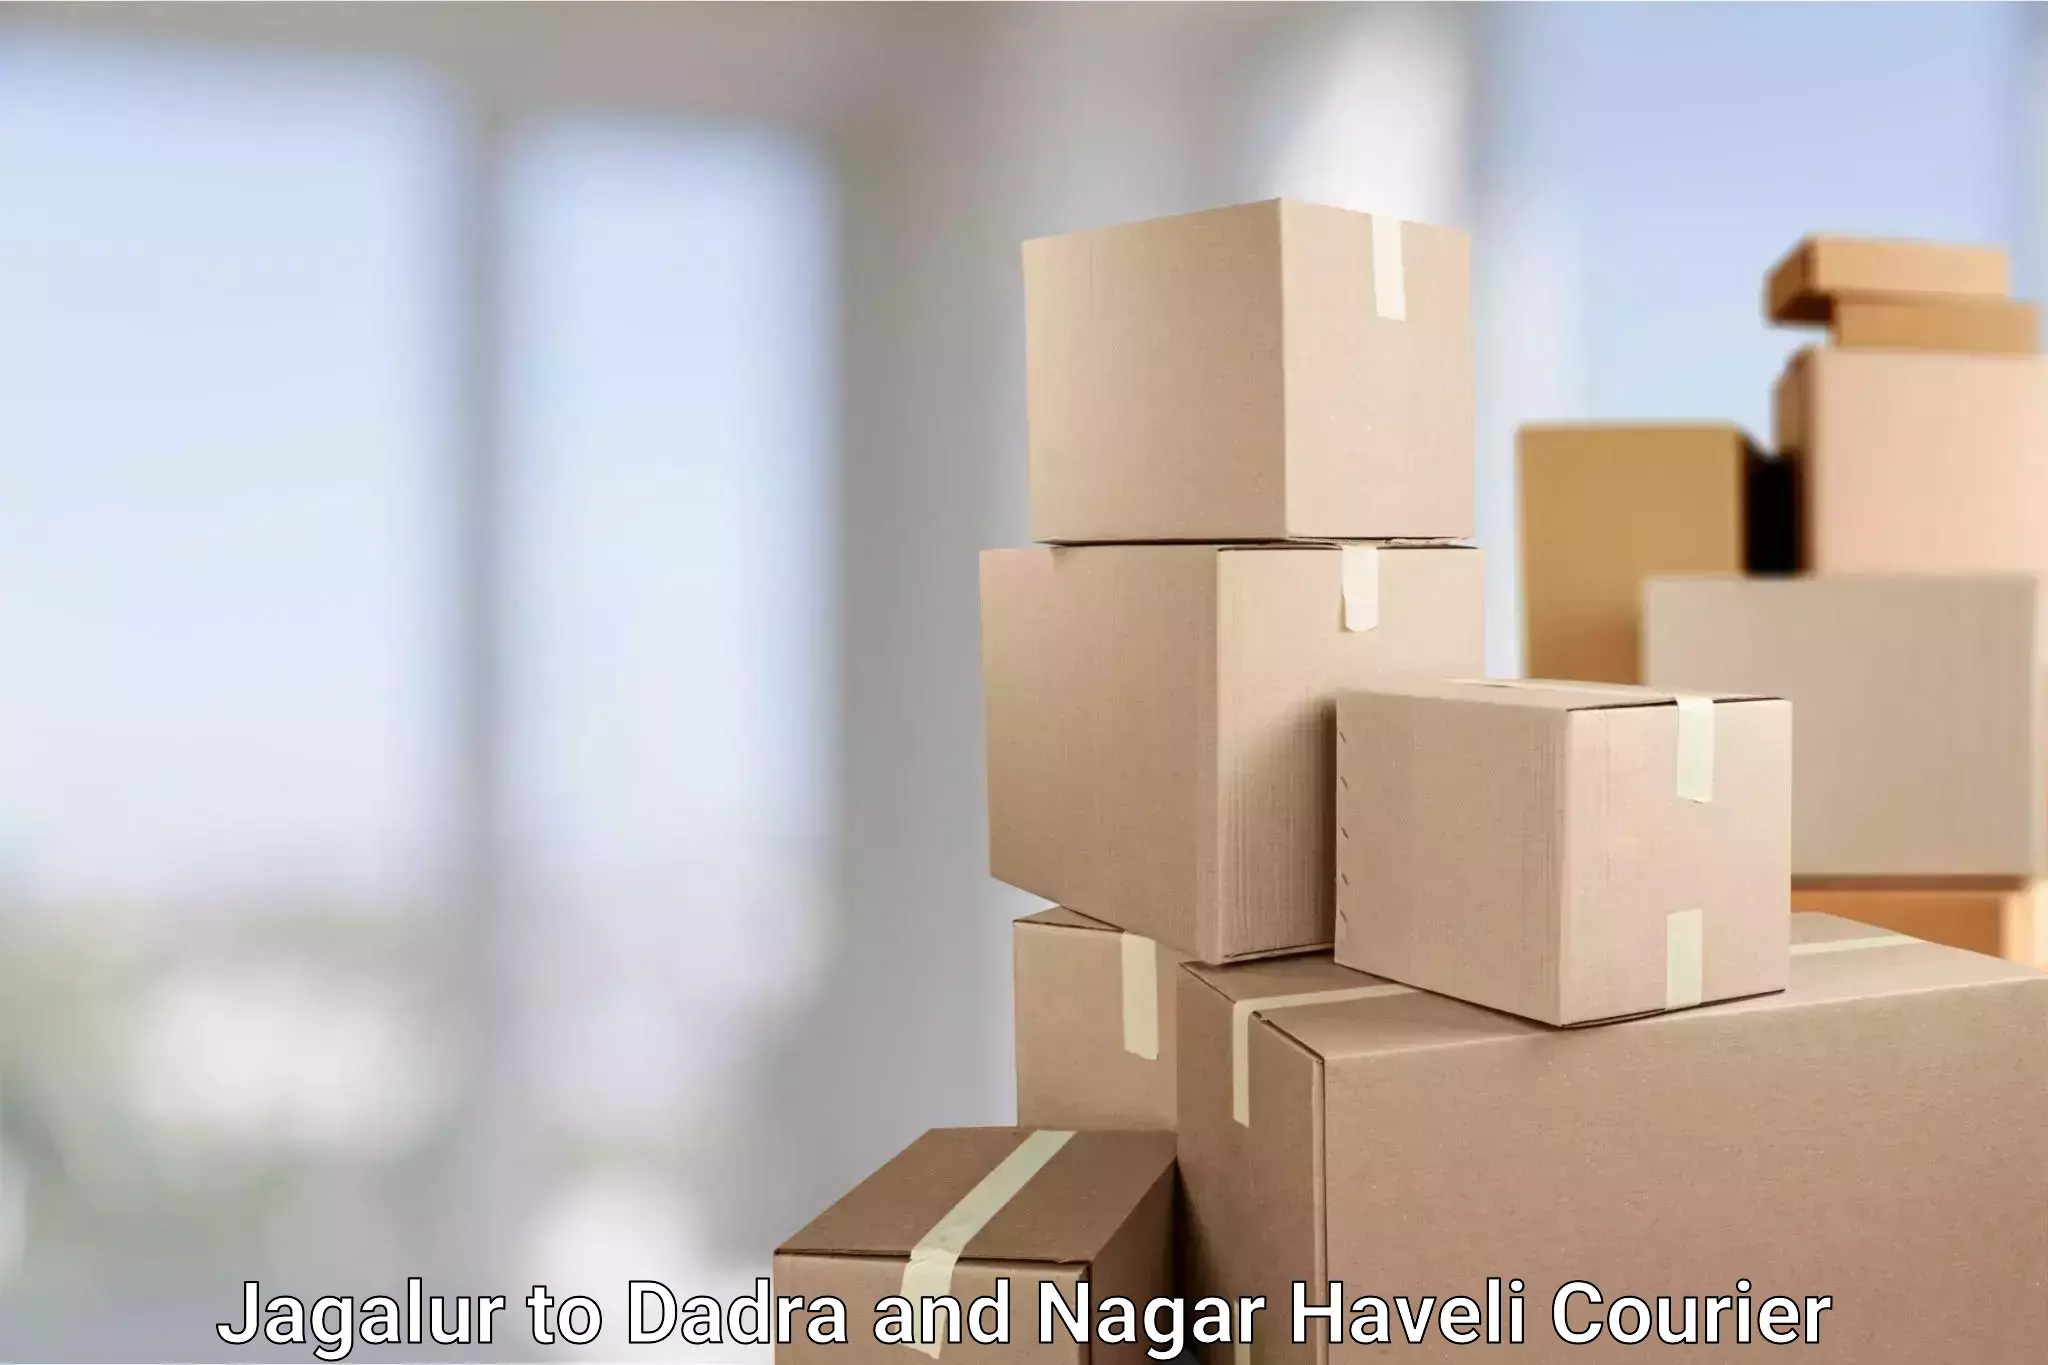 Express package delivery Jagalur to Dadra and Nagar Haveli